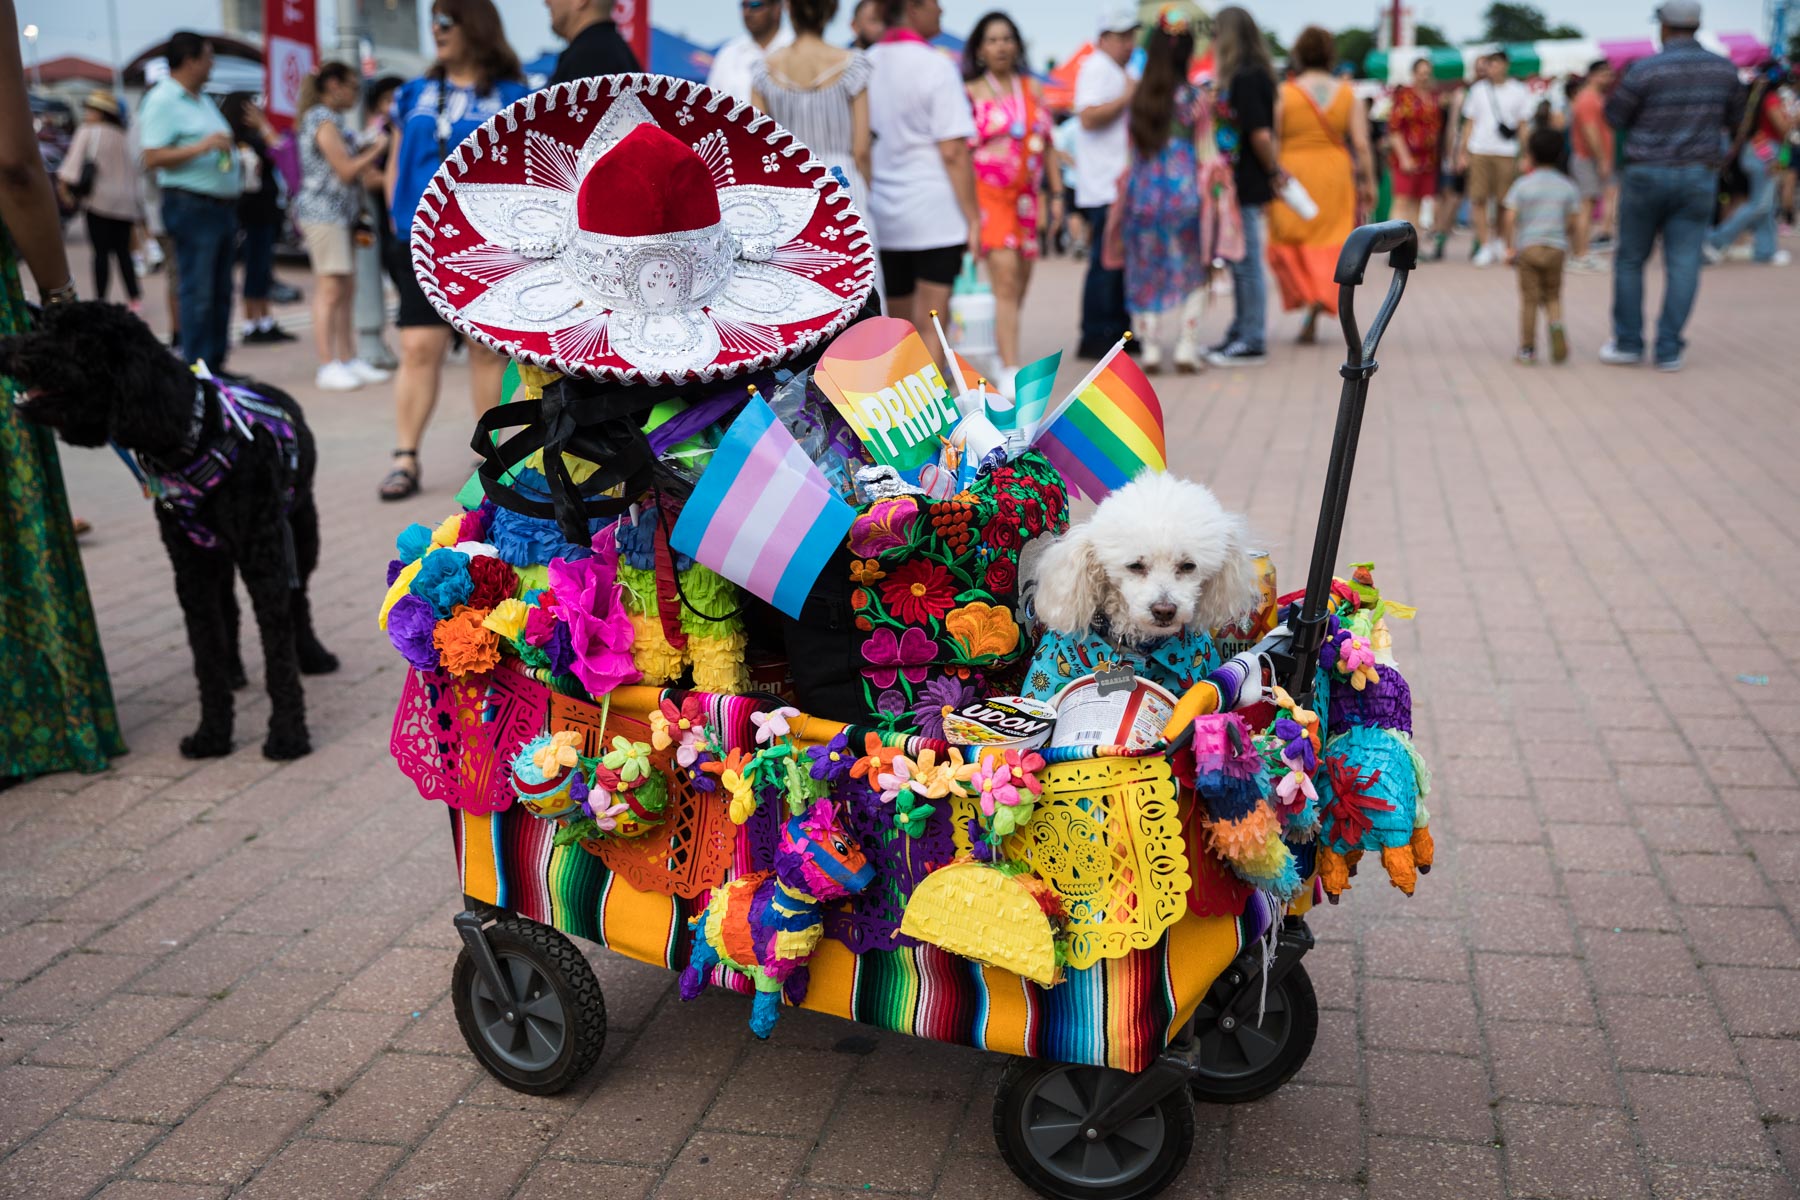 Wagon with colorful decorations and small, white poodle